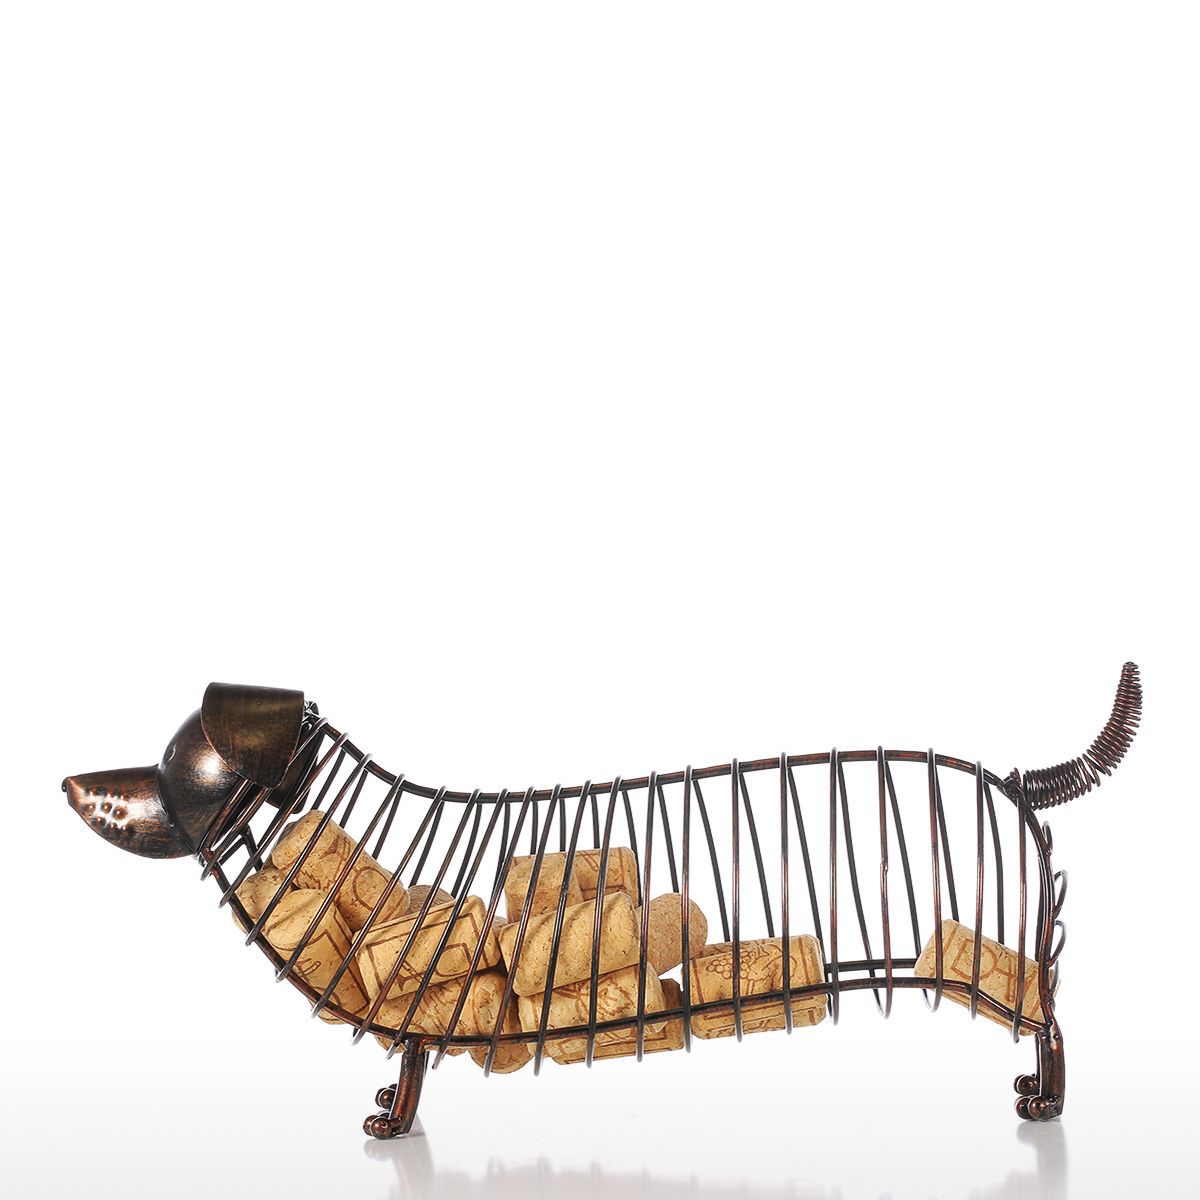 Dachshund Cork Holder - Quirky Charm for Wine Fans